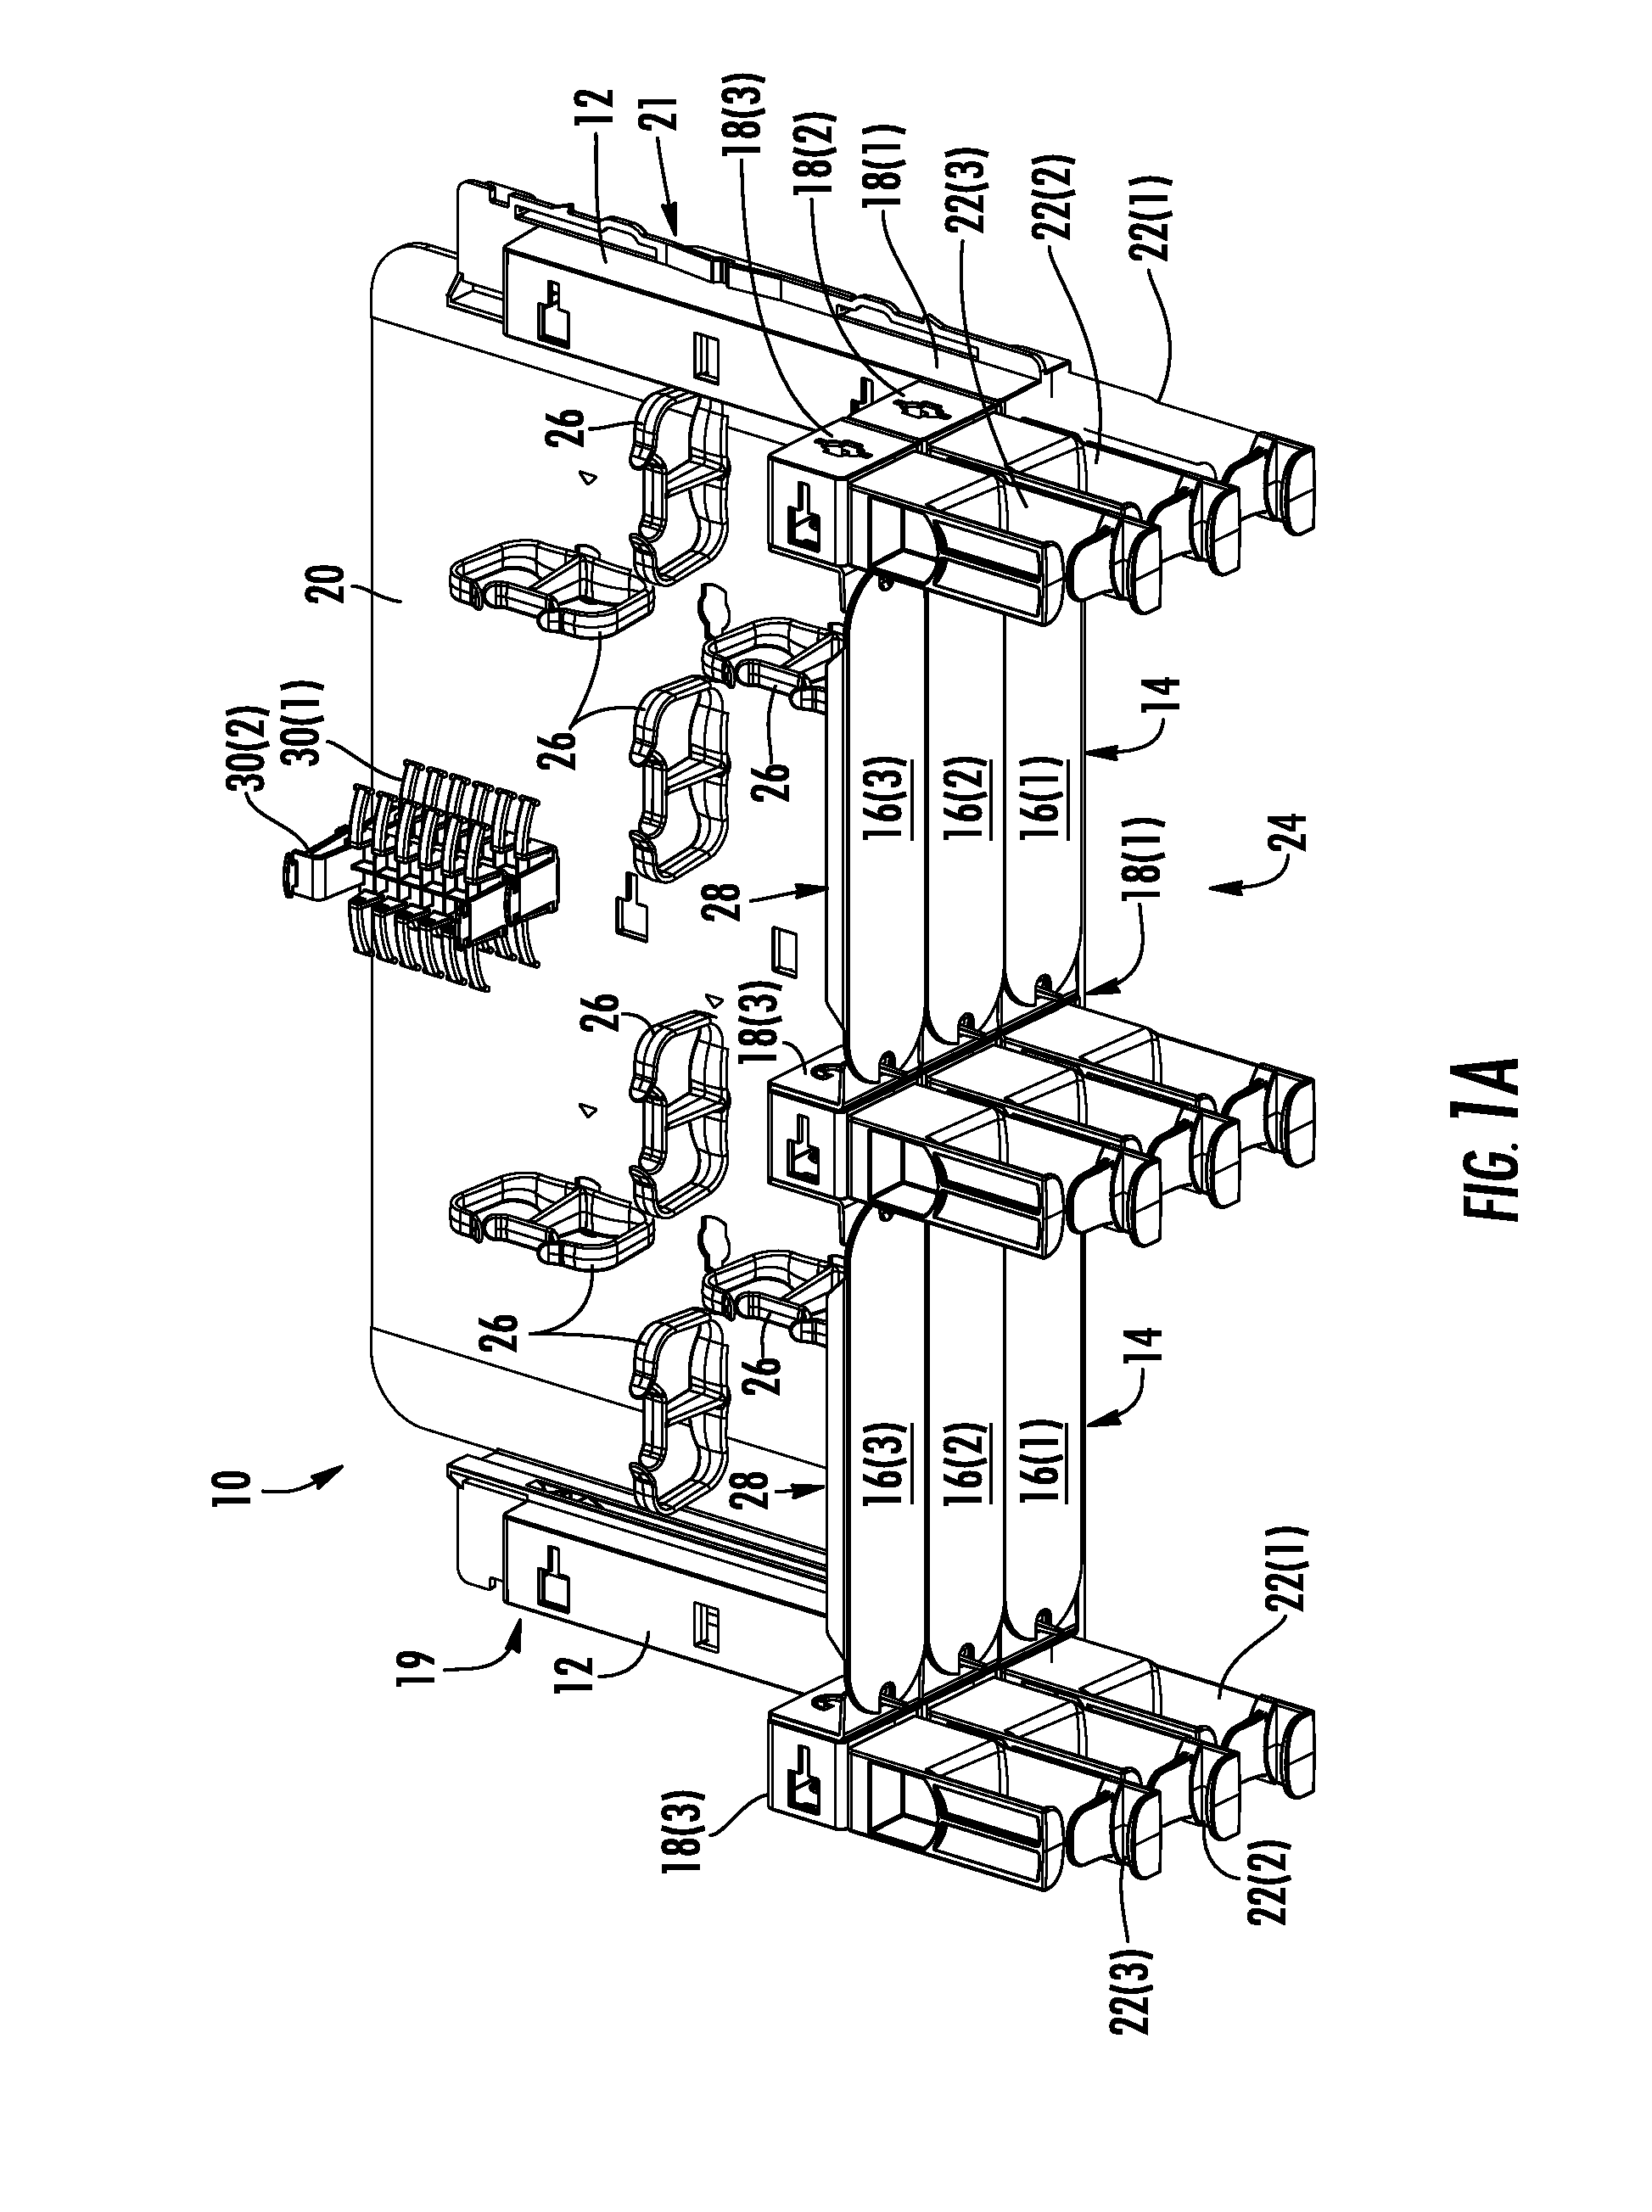 Stackable shelves for a fiber optic housing, and related components and methods